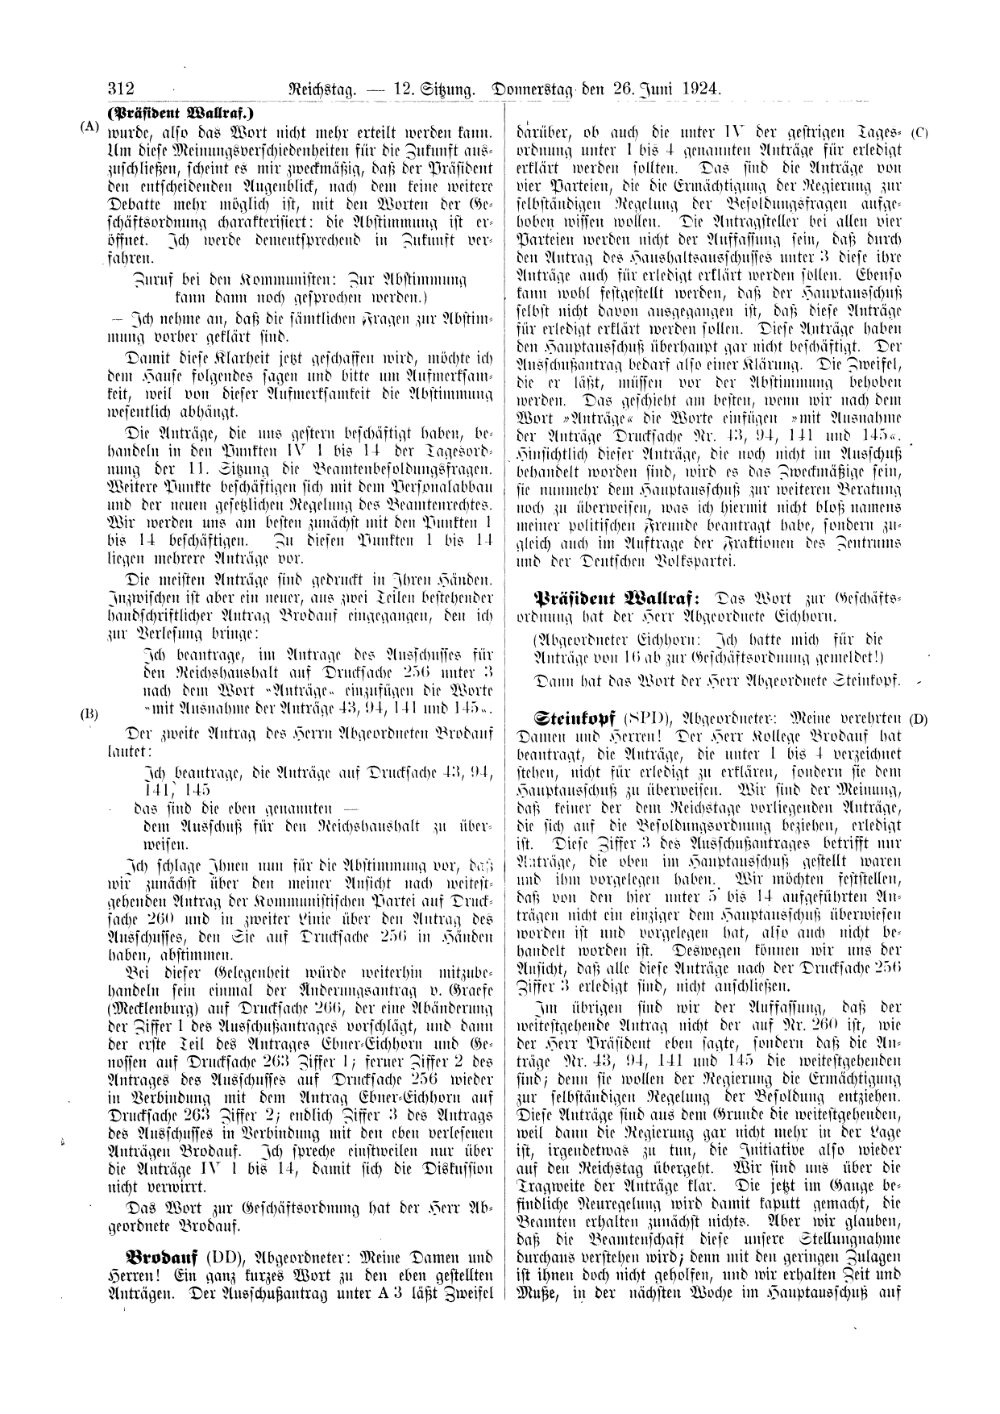 Scan of page 312